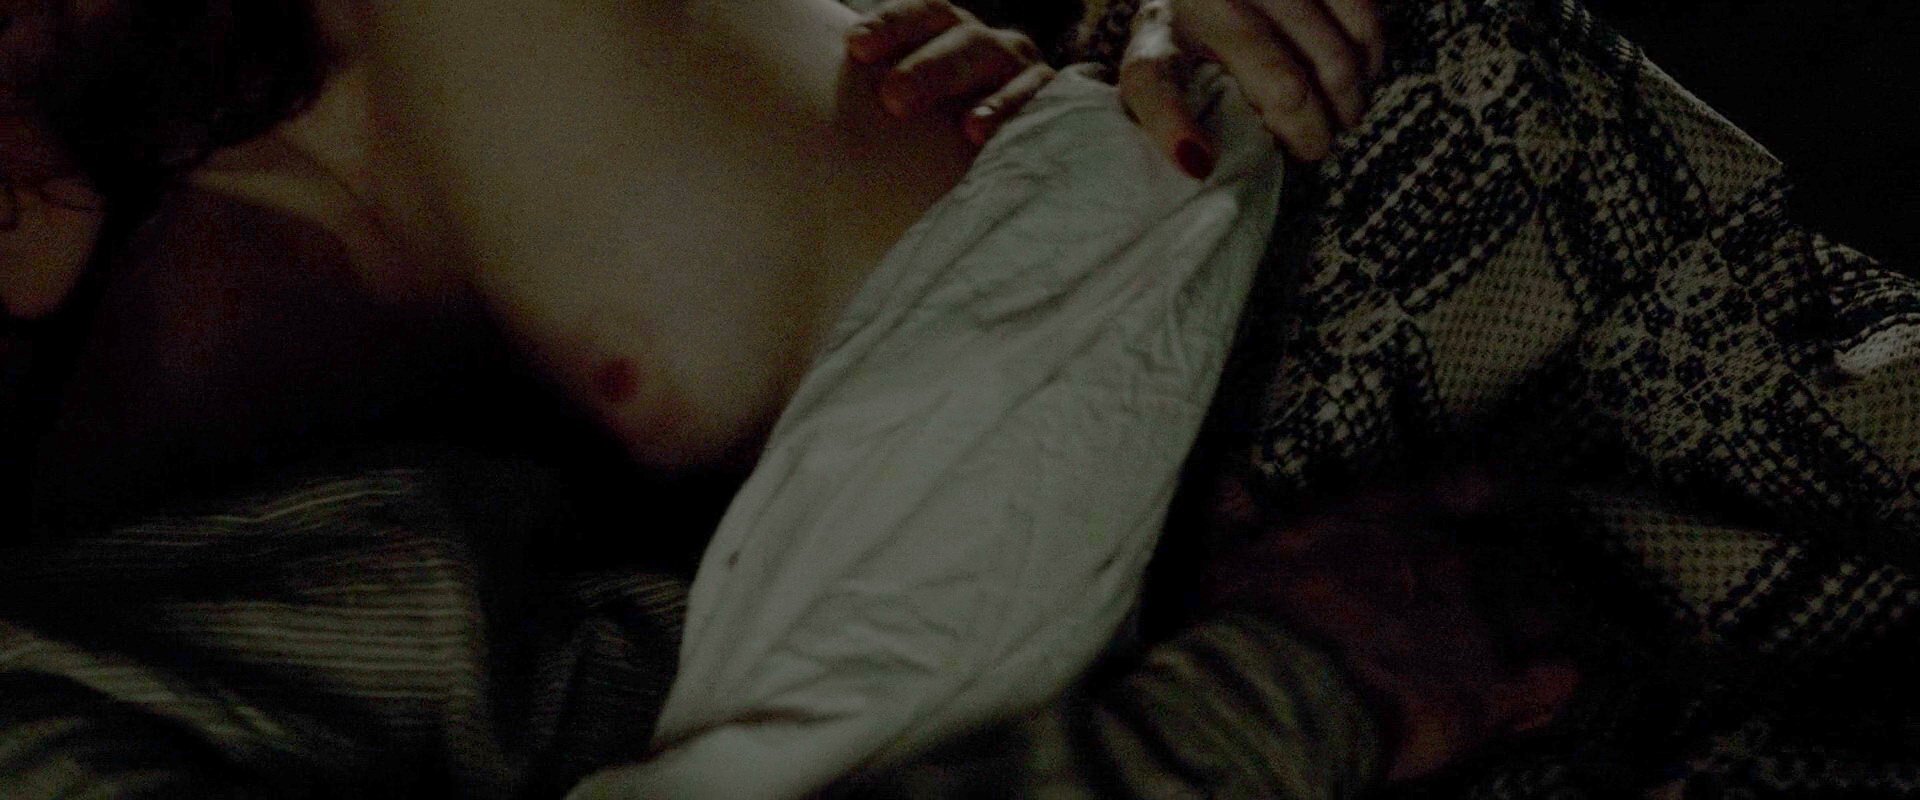 Jessica chastain nude in lawless